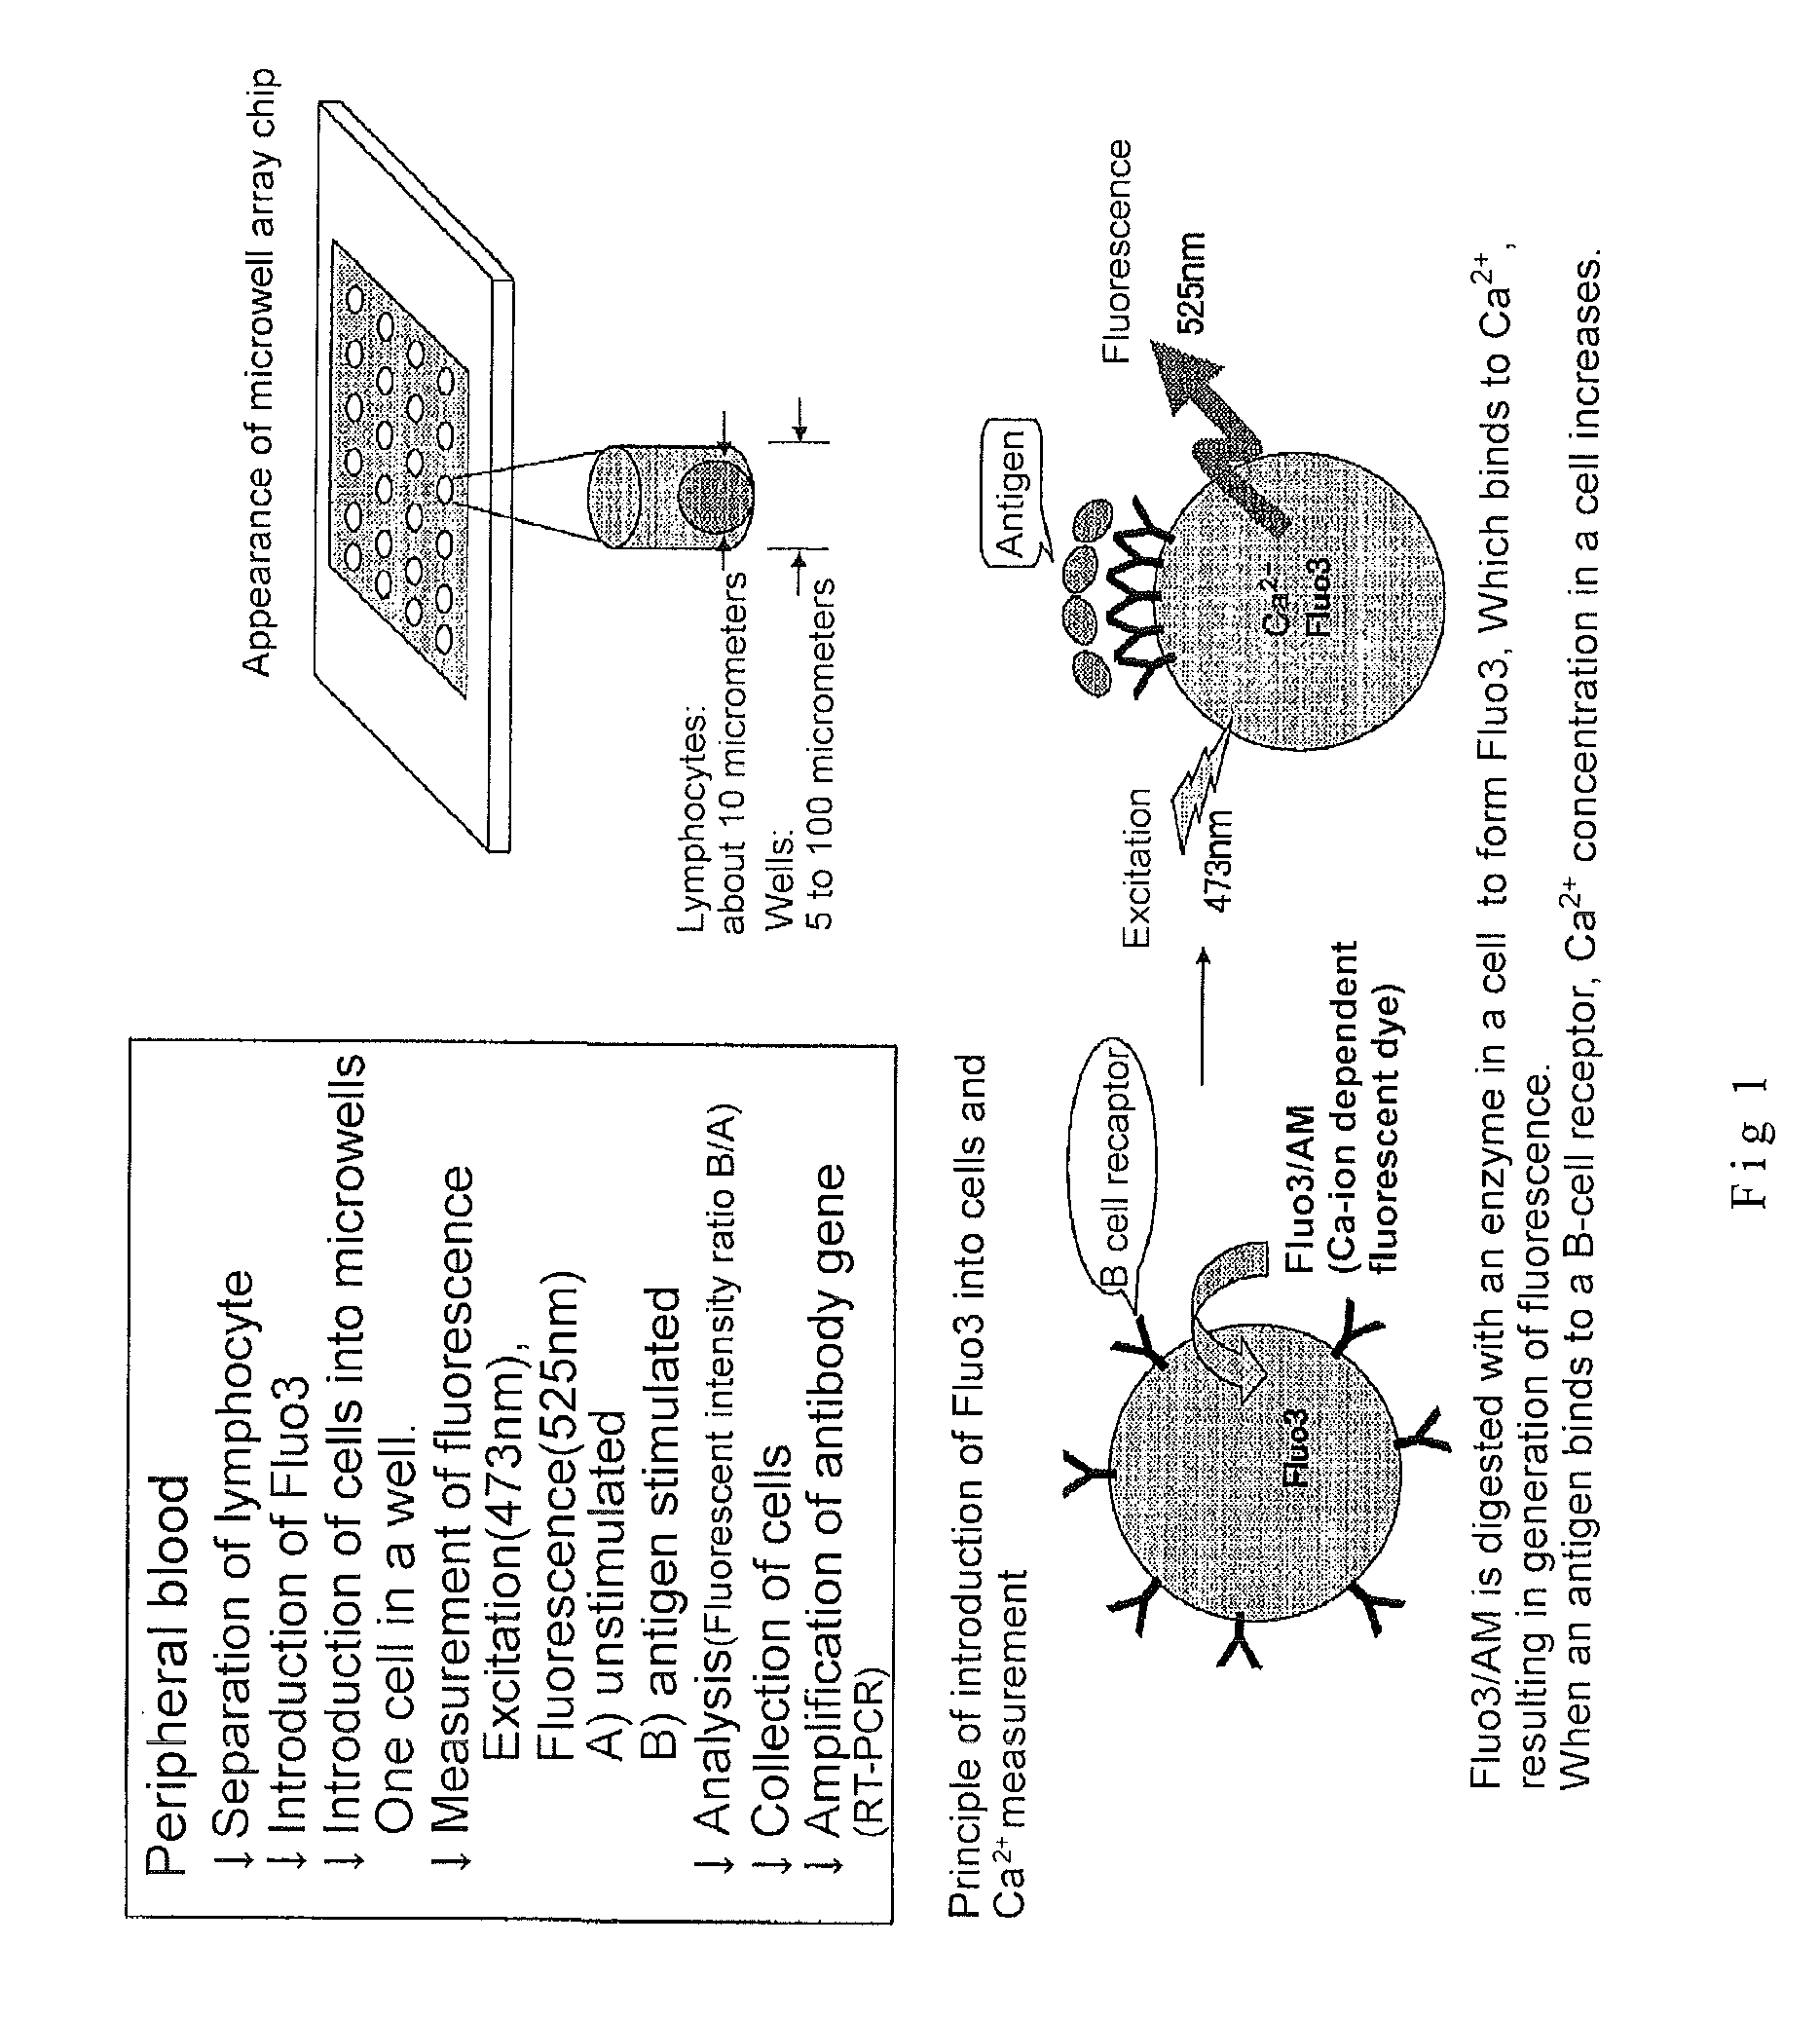 Microwell array chip for detecting antigen-specific lymphocytes, method of detecting and method of manufacturing antigen-specific lymphocytes, and method of cloning antigen-specific lymphocyte antigen receptor genes